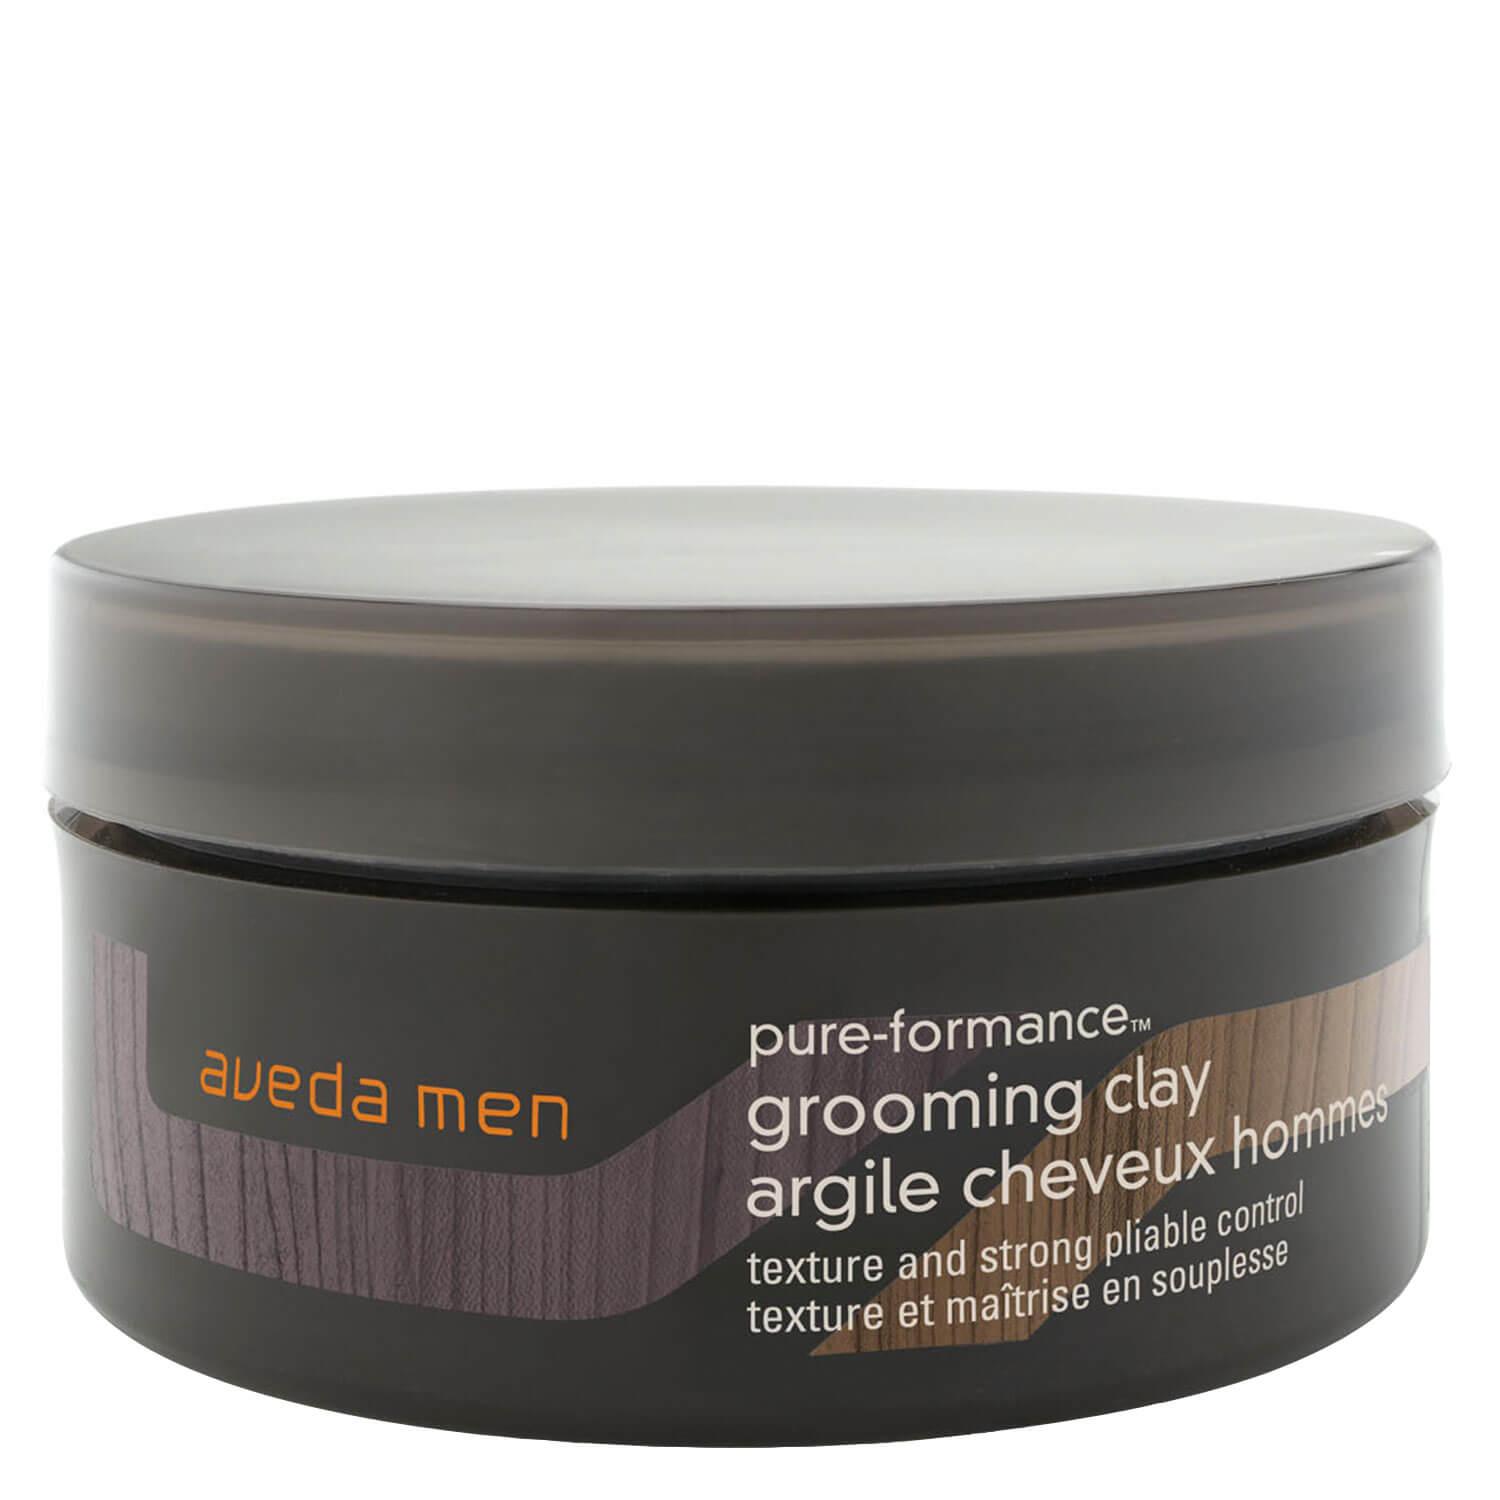 men pure-formance - grooming clay